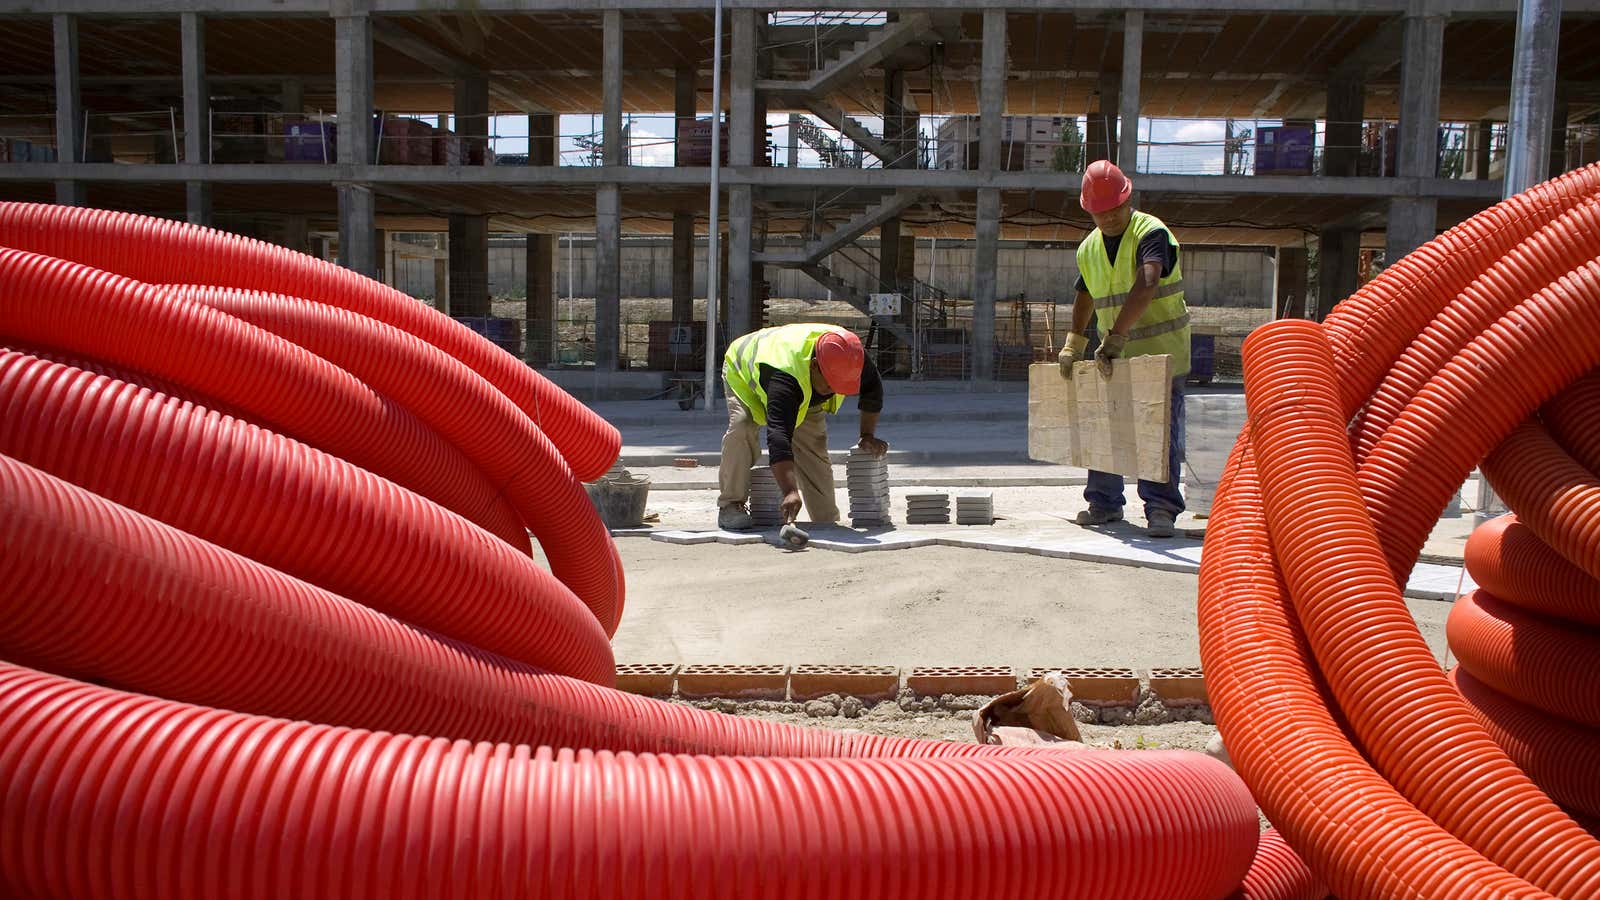 The European Commission has some bad news for these Spanish construction workers and their tubes.